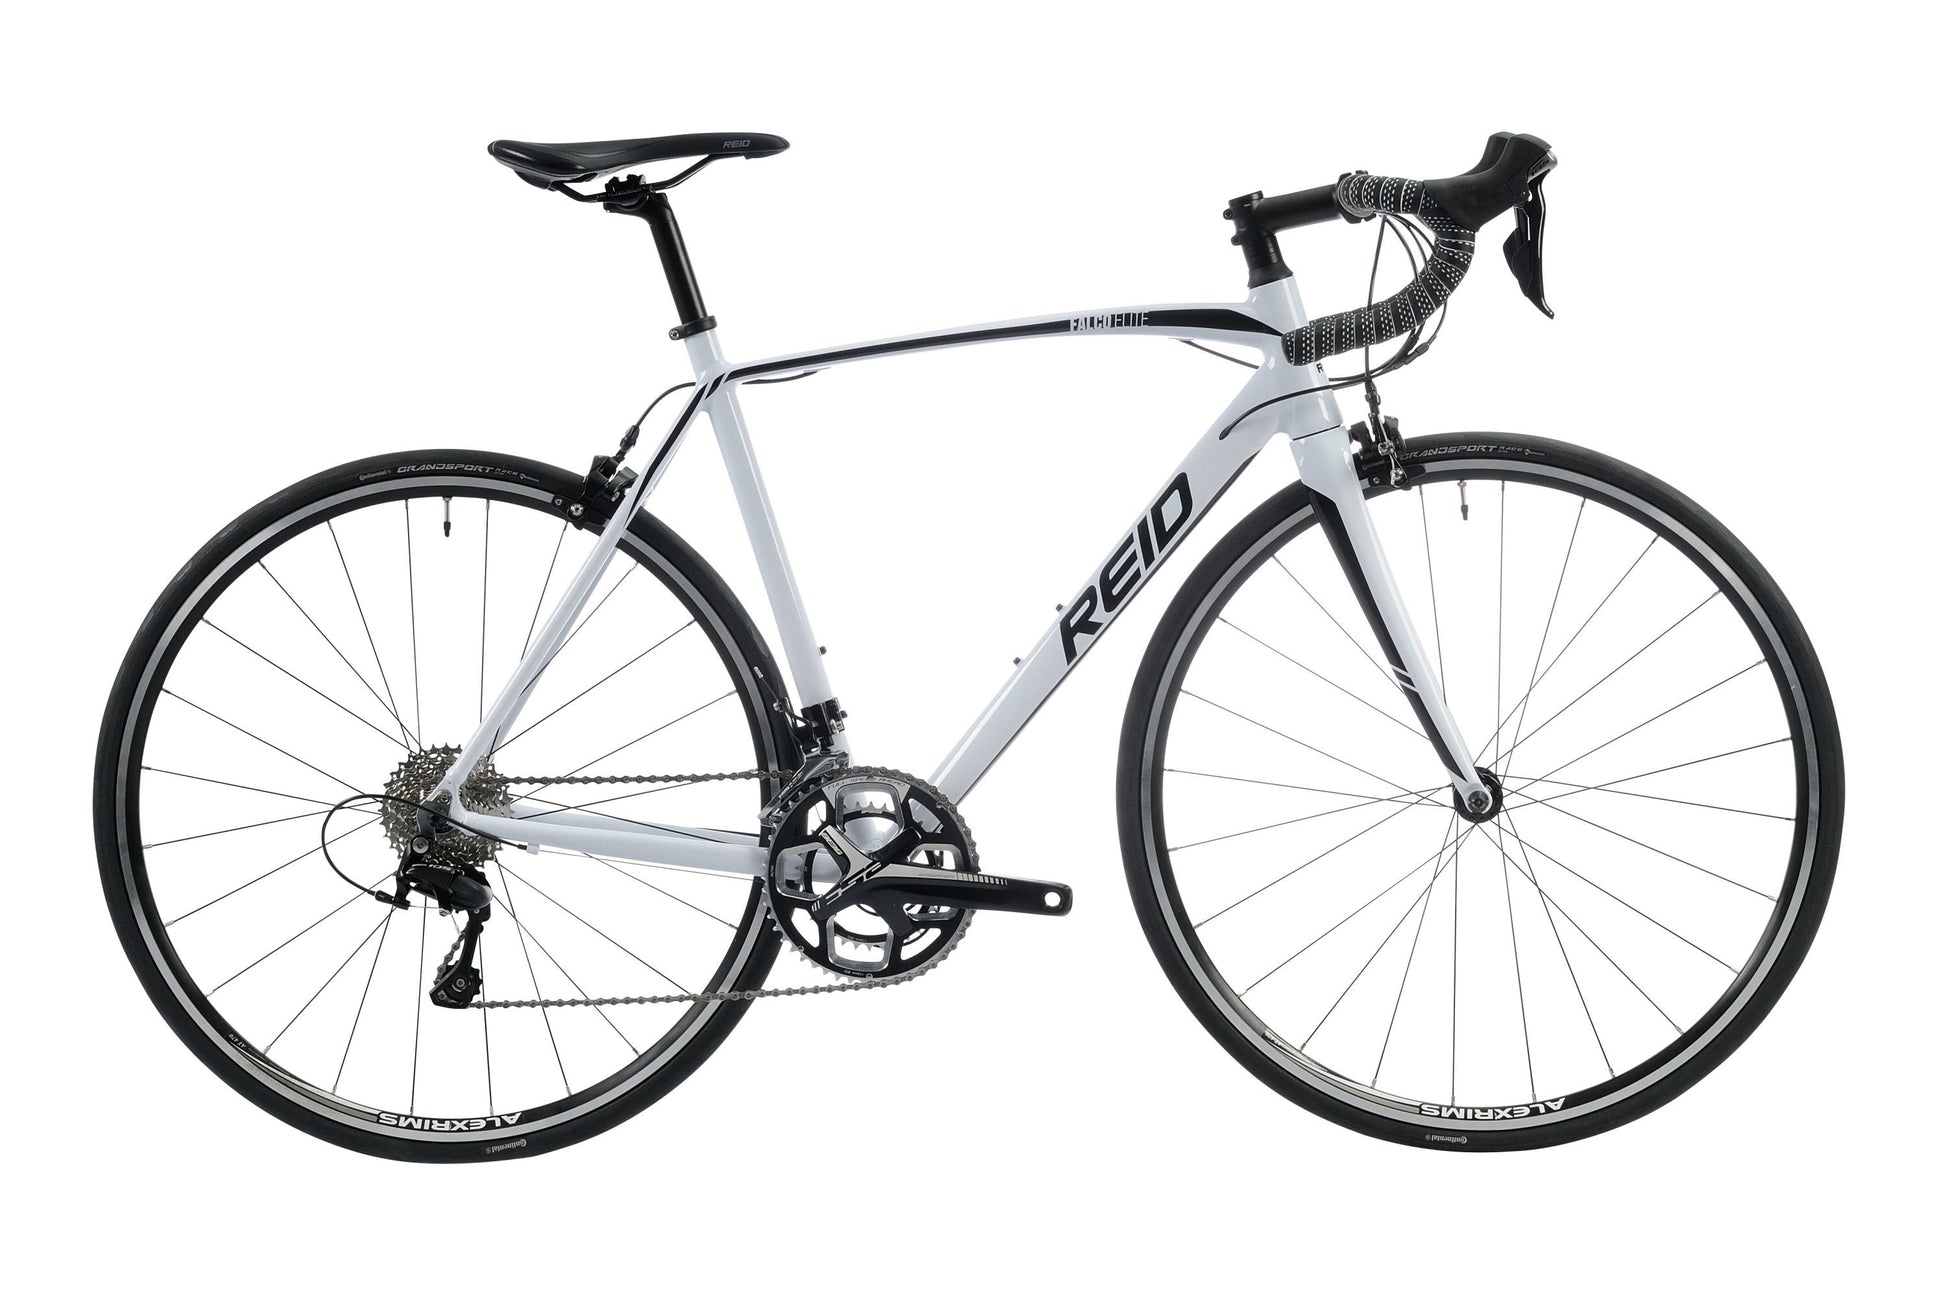 Falco Elite Road Bike in White with Shimano 11-speed gearing from Reid Cycles Australia